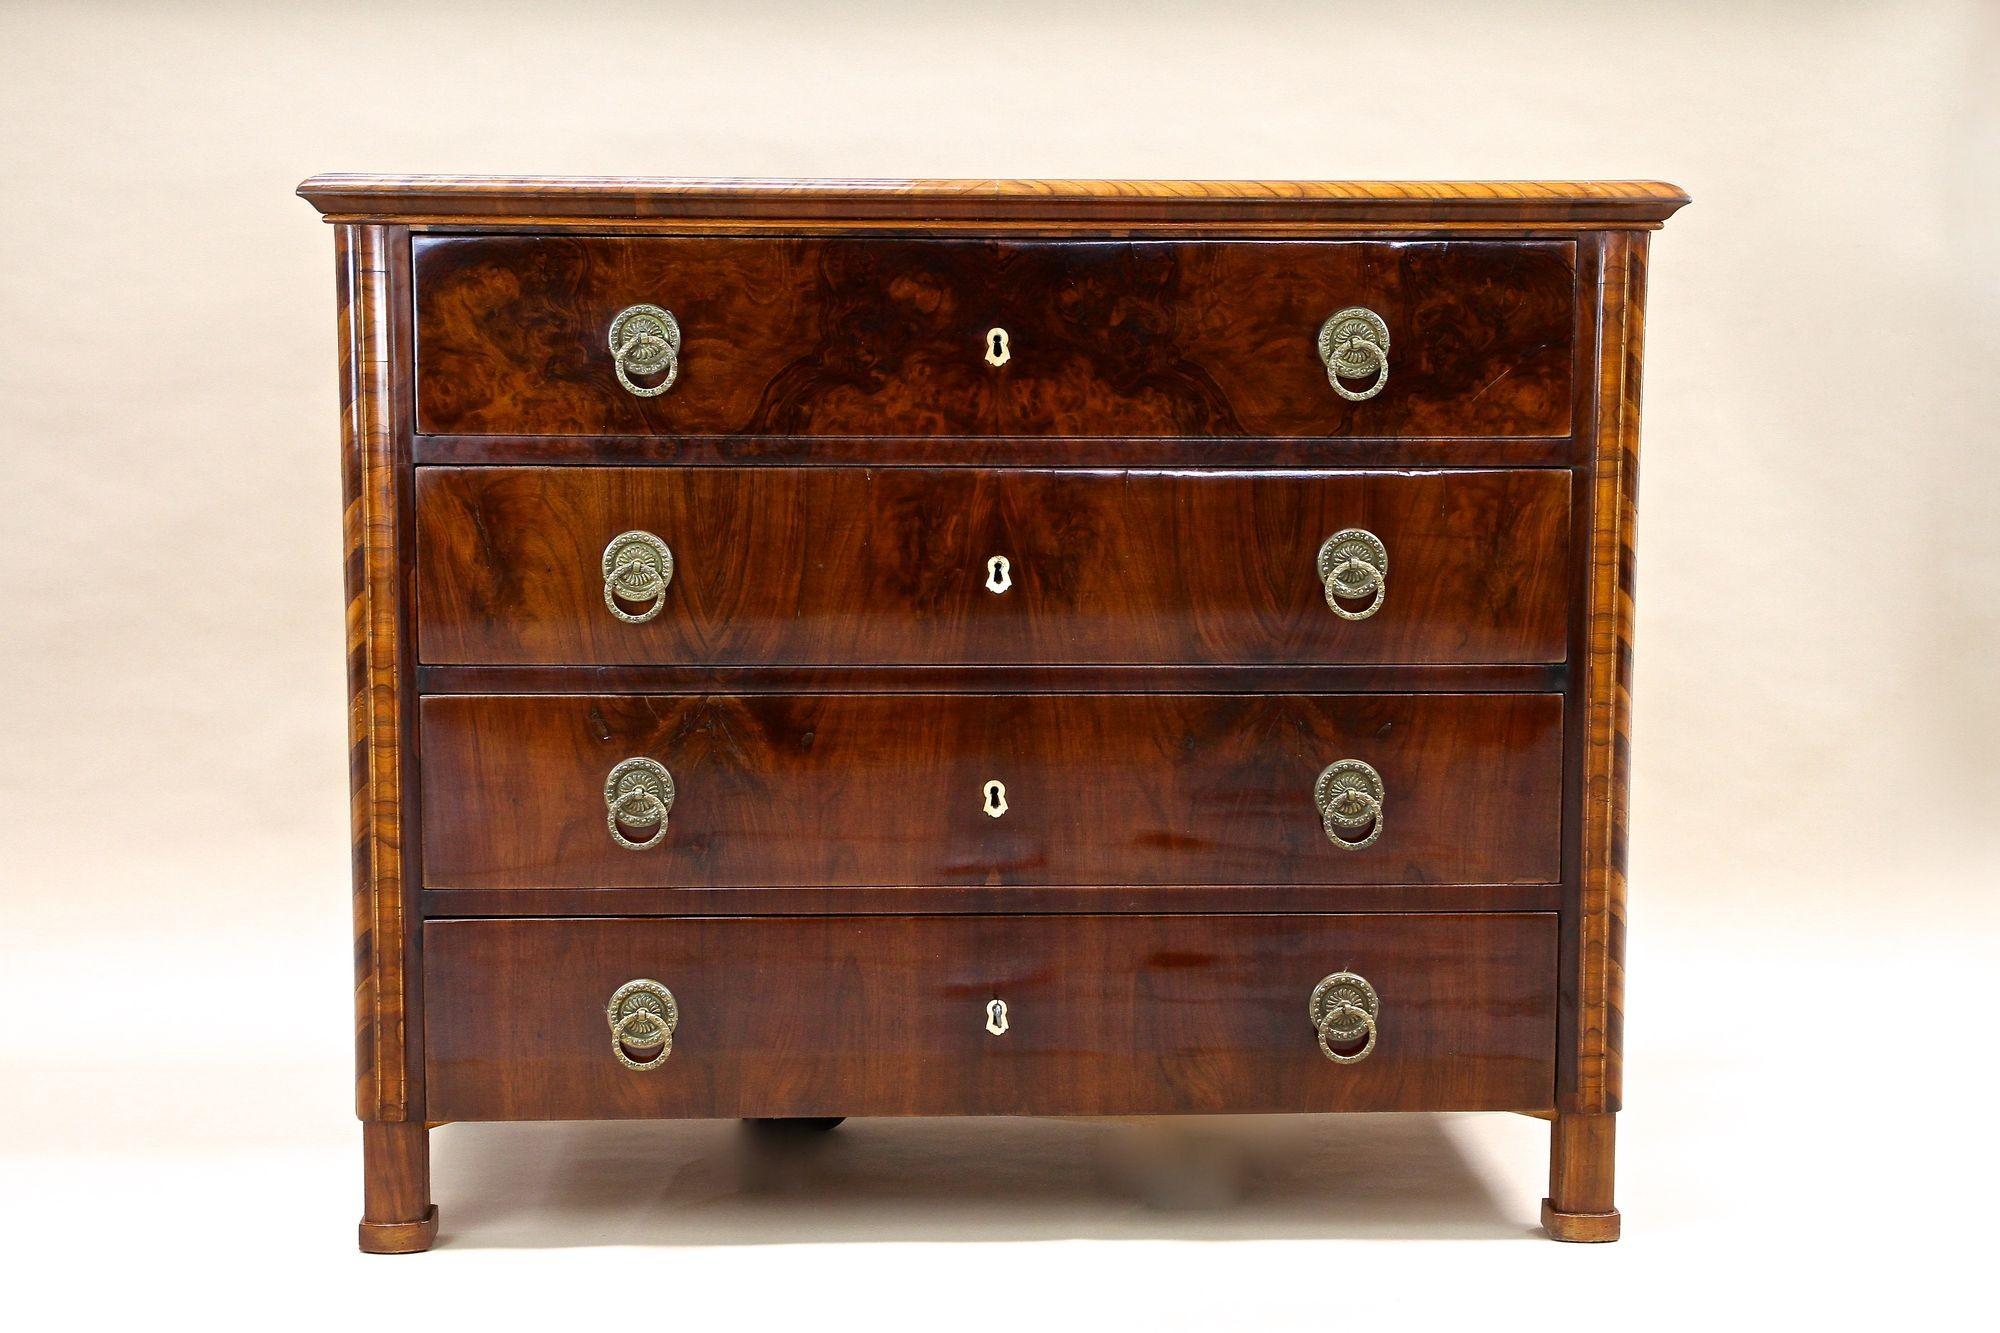 Remarkable 19th century nutwood chest of drawers coming from the capital city of traditional Biedermeier furniture: Vienna, Austria. This fresh restored Biedermeier commode was elaborately made around 1840 and impresses with an amazing grain. The